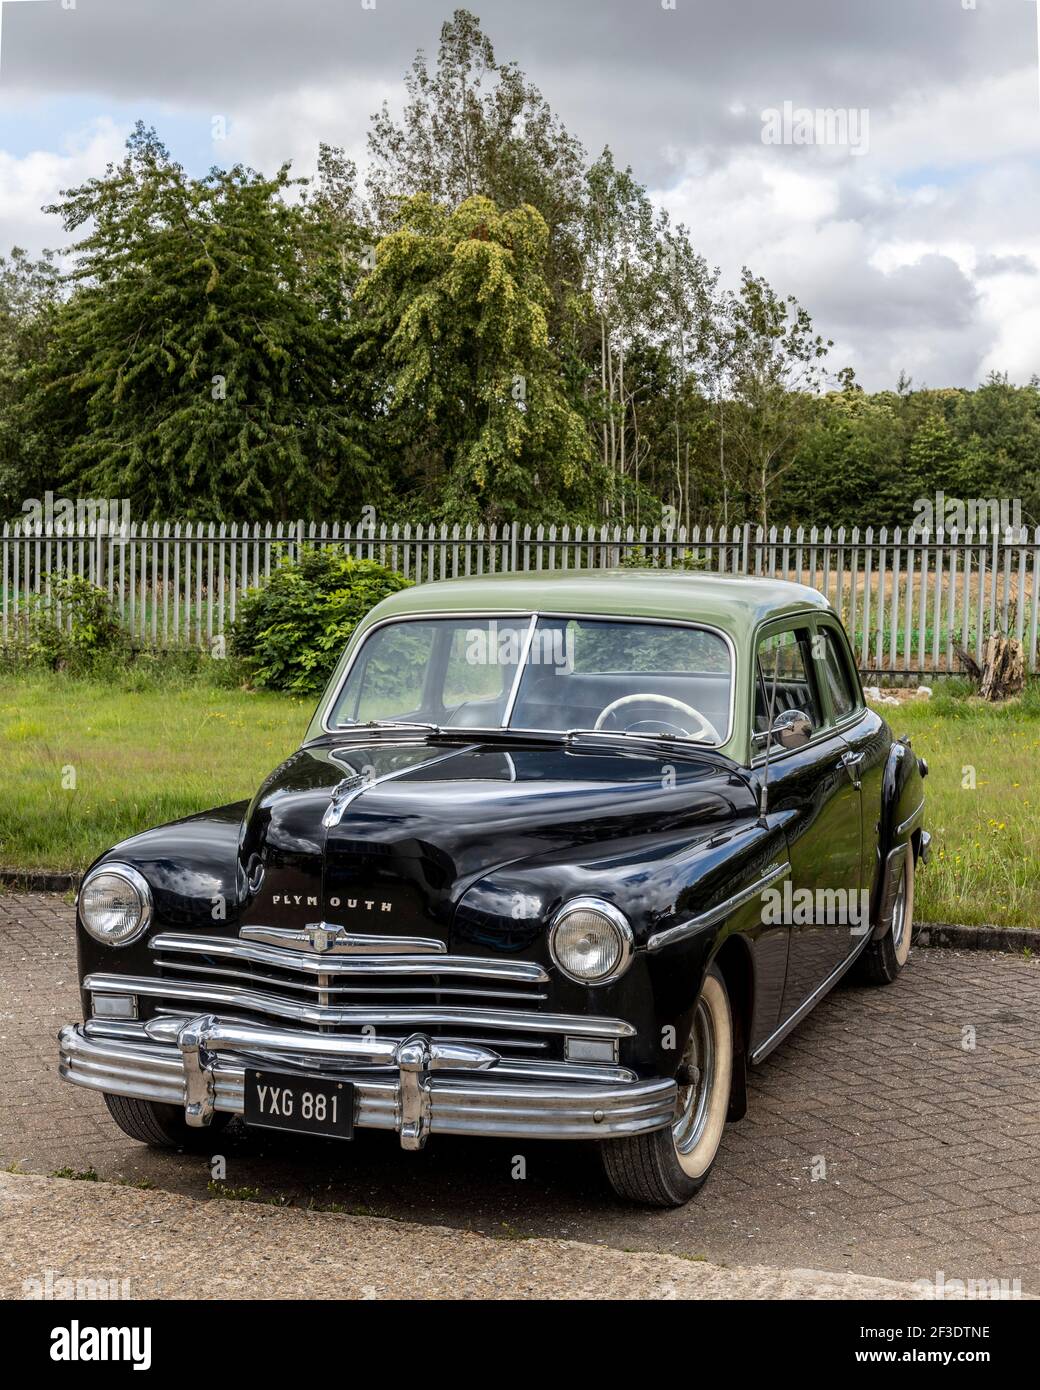 1949 Plymouth Special Deluxe Sedan on display at Lenwade Industrial Estate, Norfolk, UK. Stock Photo